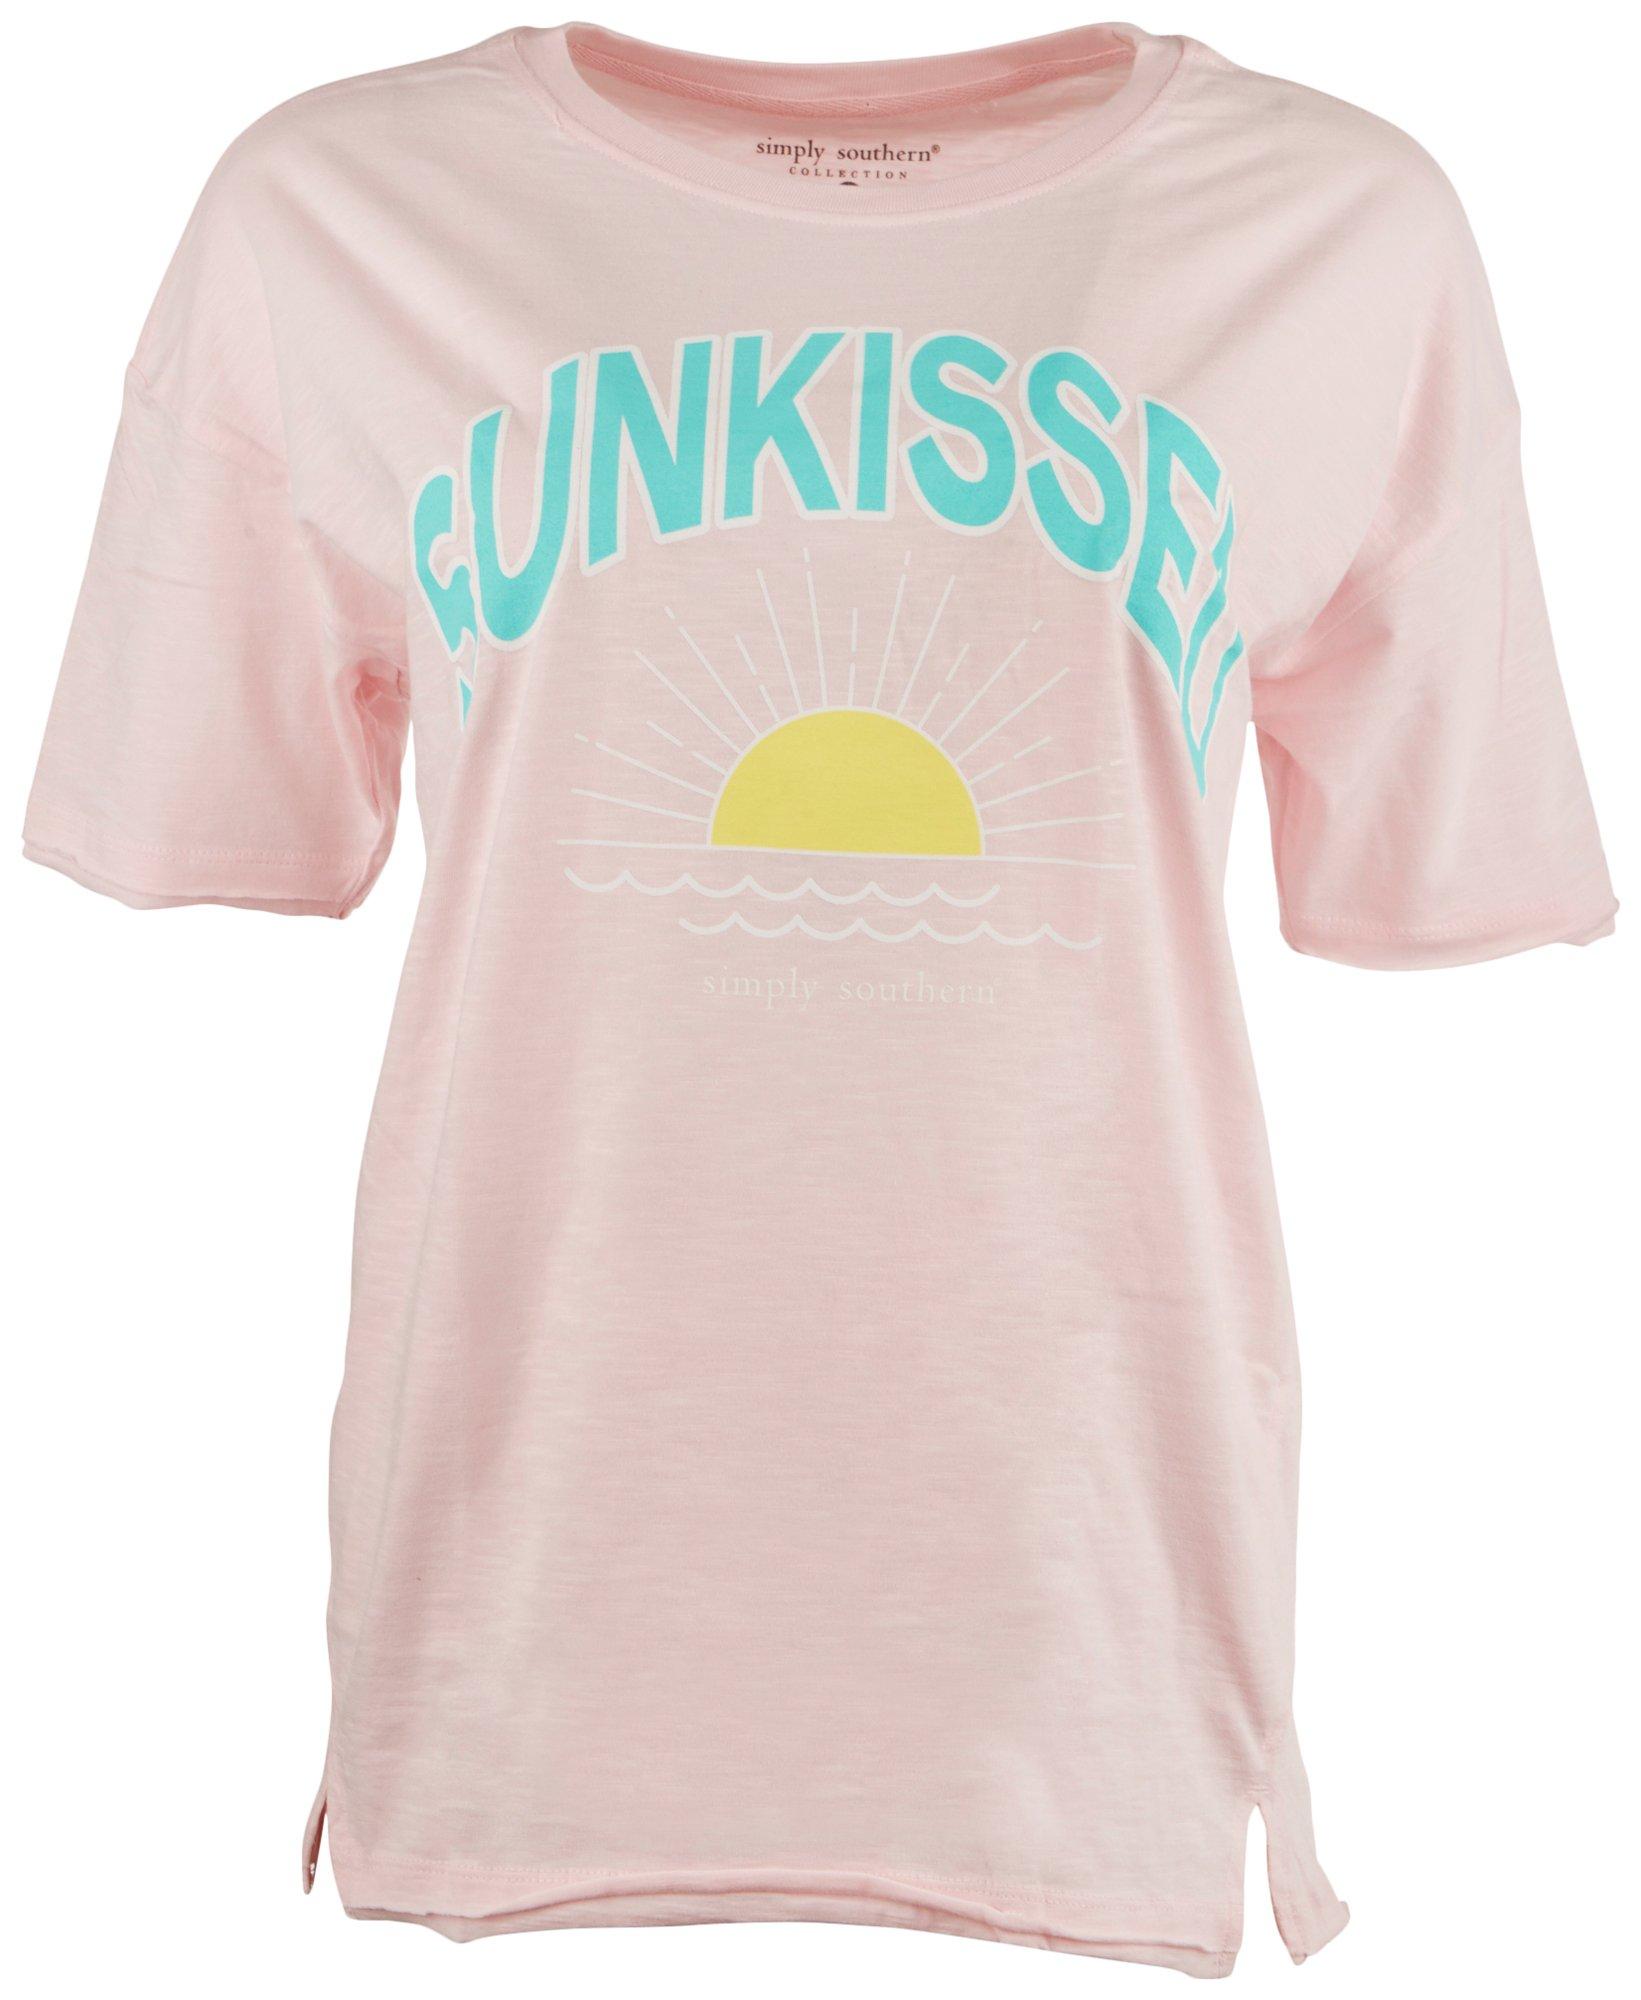 Simply Southern Juniors Sunkissed Short Sleeve Top